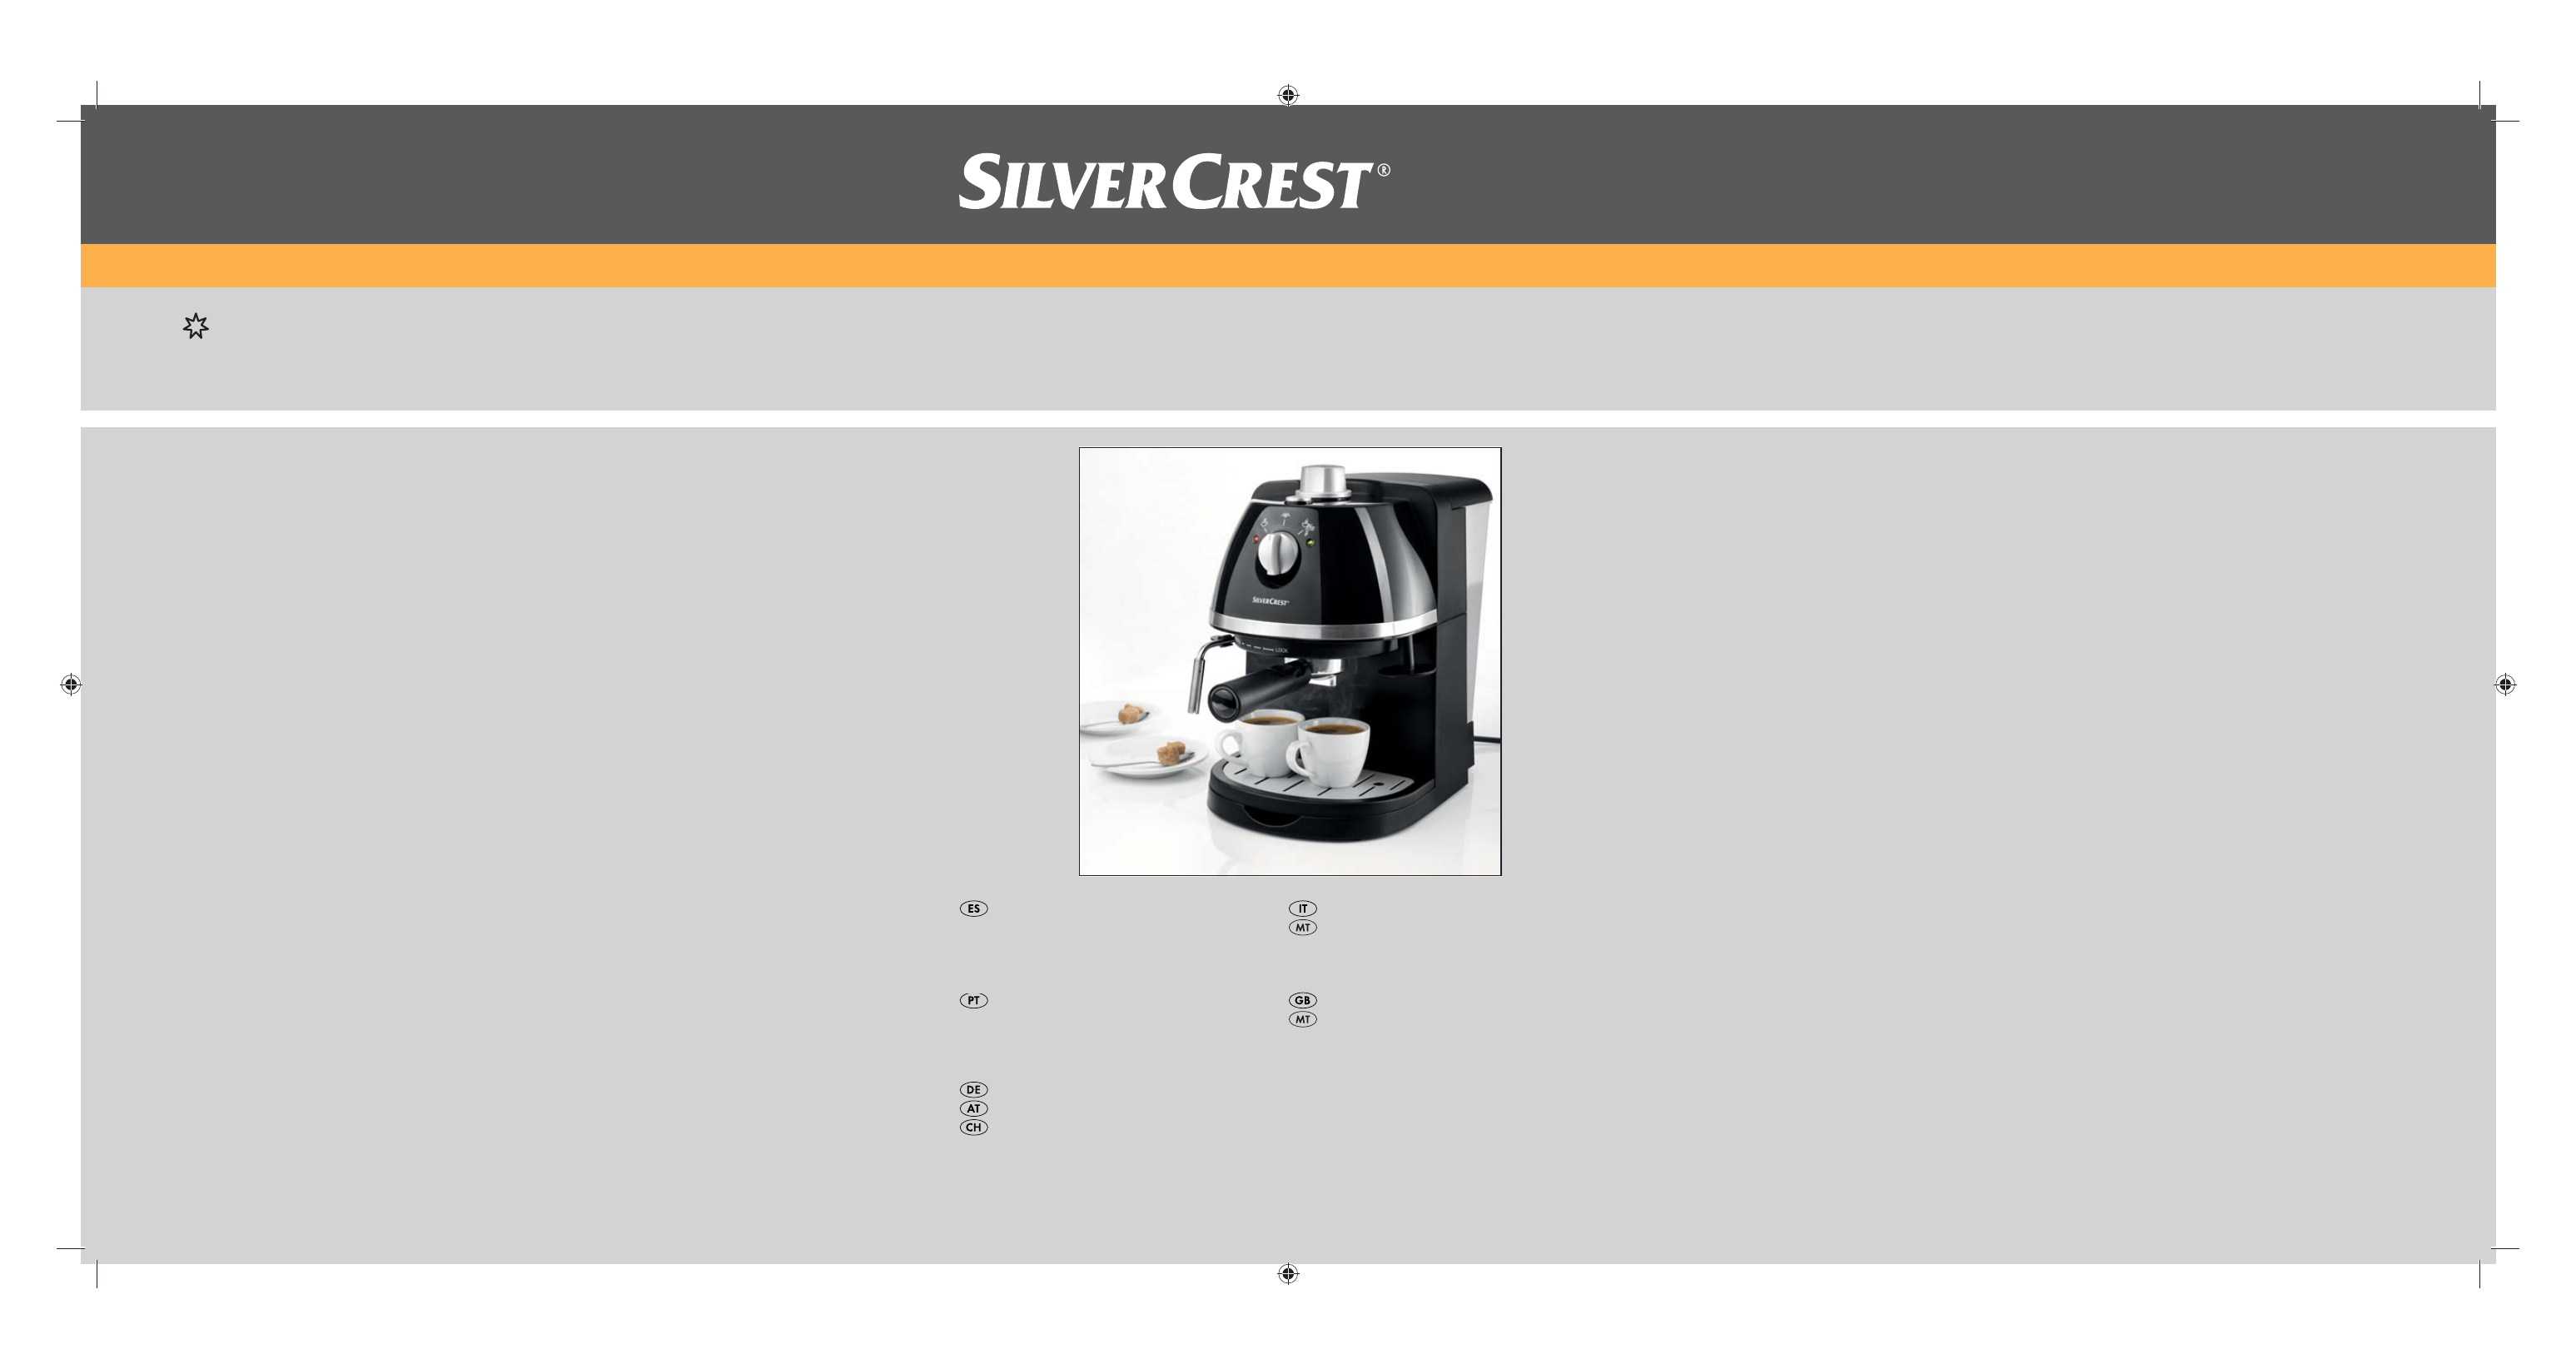 Silvercrest SEM 1100 A2 User Manual | 102 pages | Also for: SEM 1100 A1